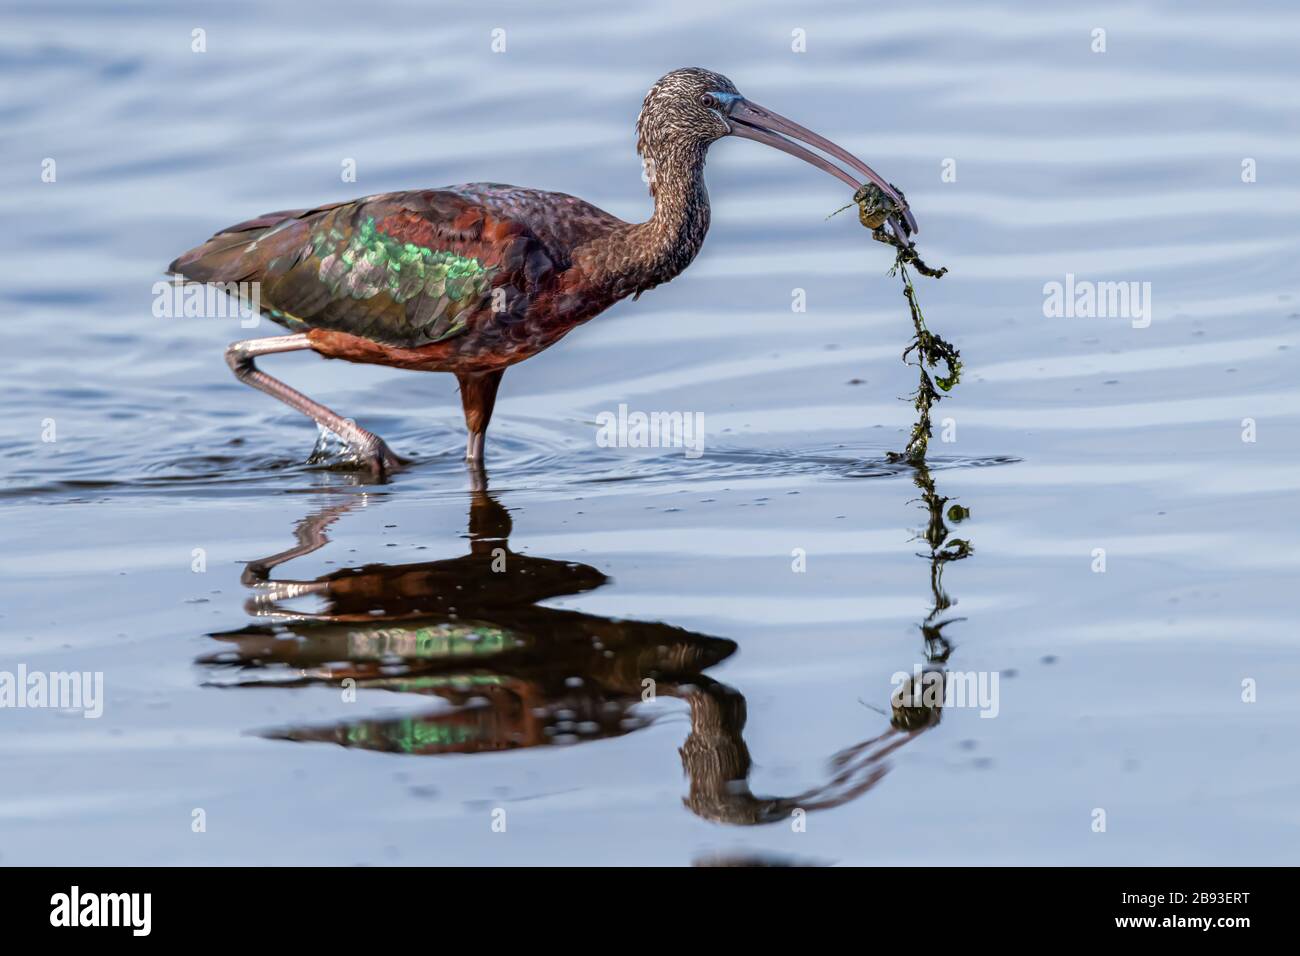 A Glossy Ibis (Plegadis falcinellus) is reflected in the water as it wades with a fish and vegetation in it's beak. Stock Photo